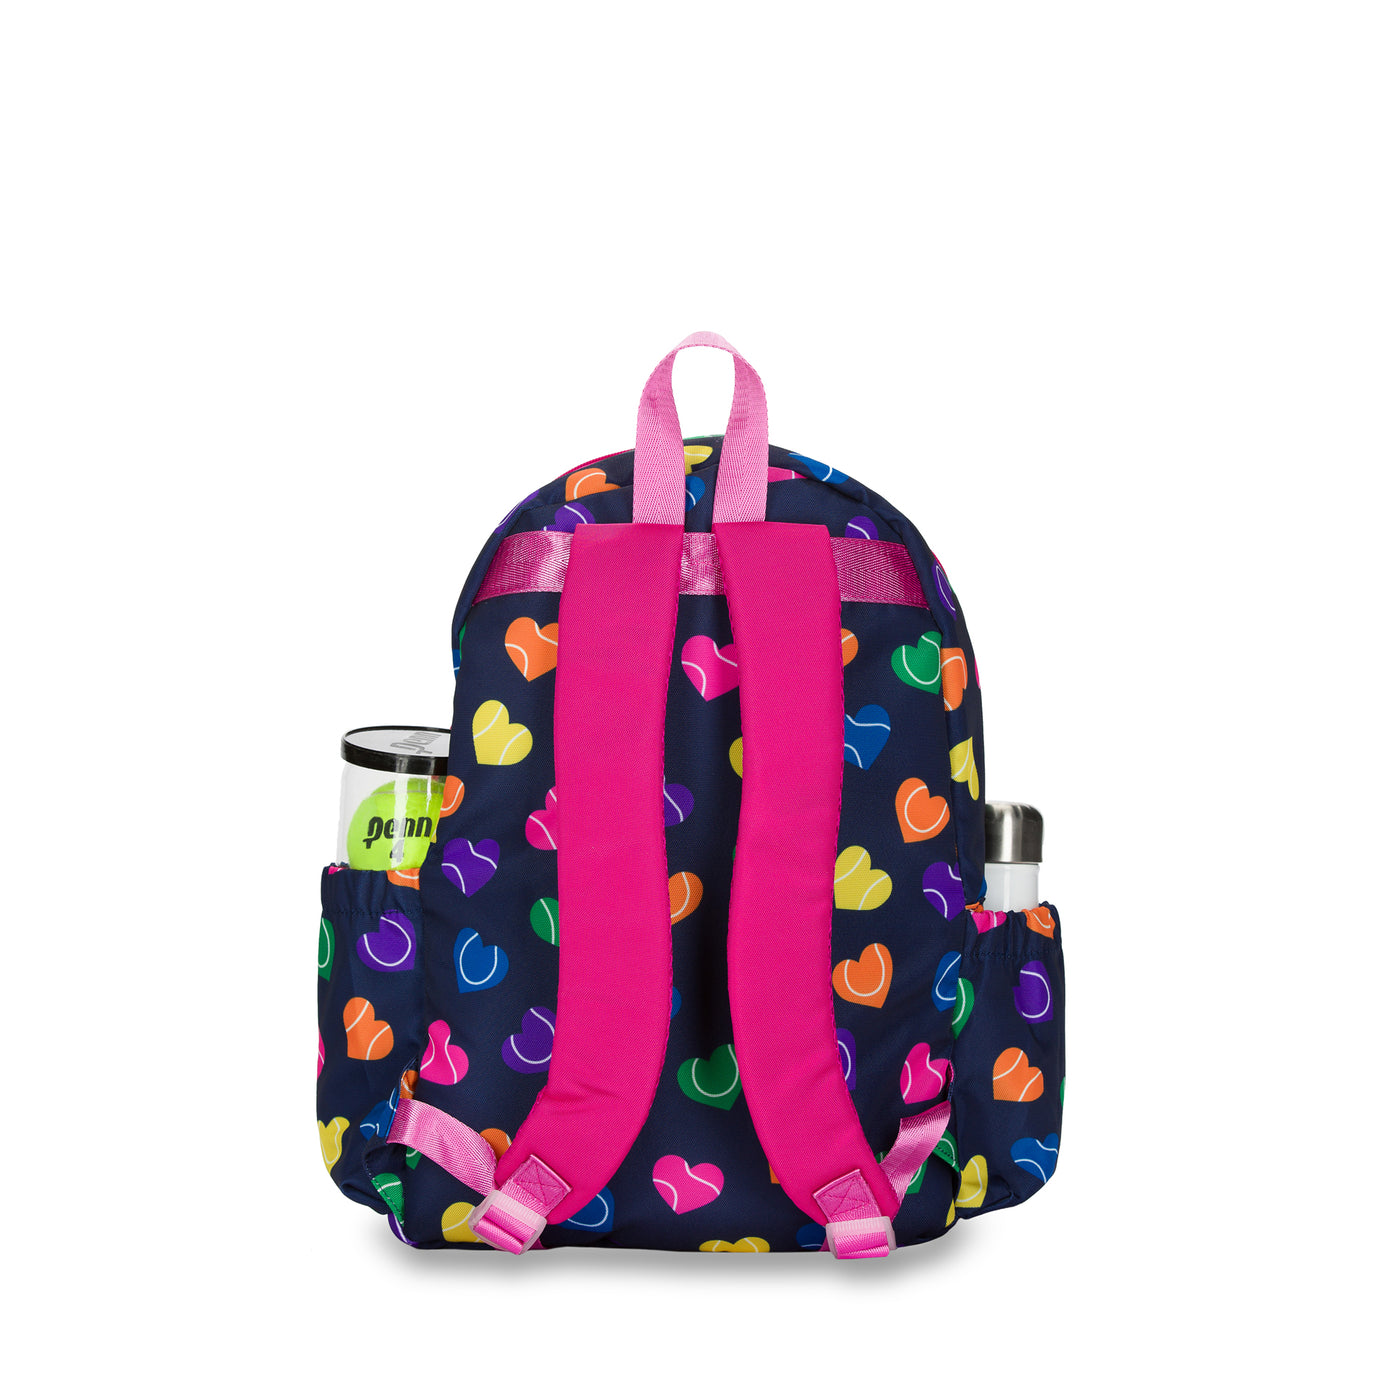 Back view of navy kids tennis backpack with repeating rainbow heart shaped tennis balls pattern.